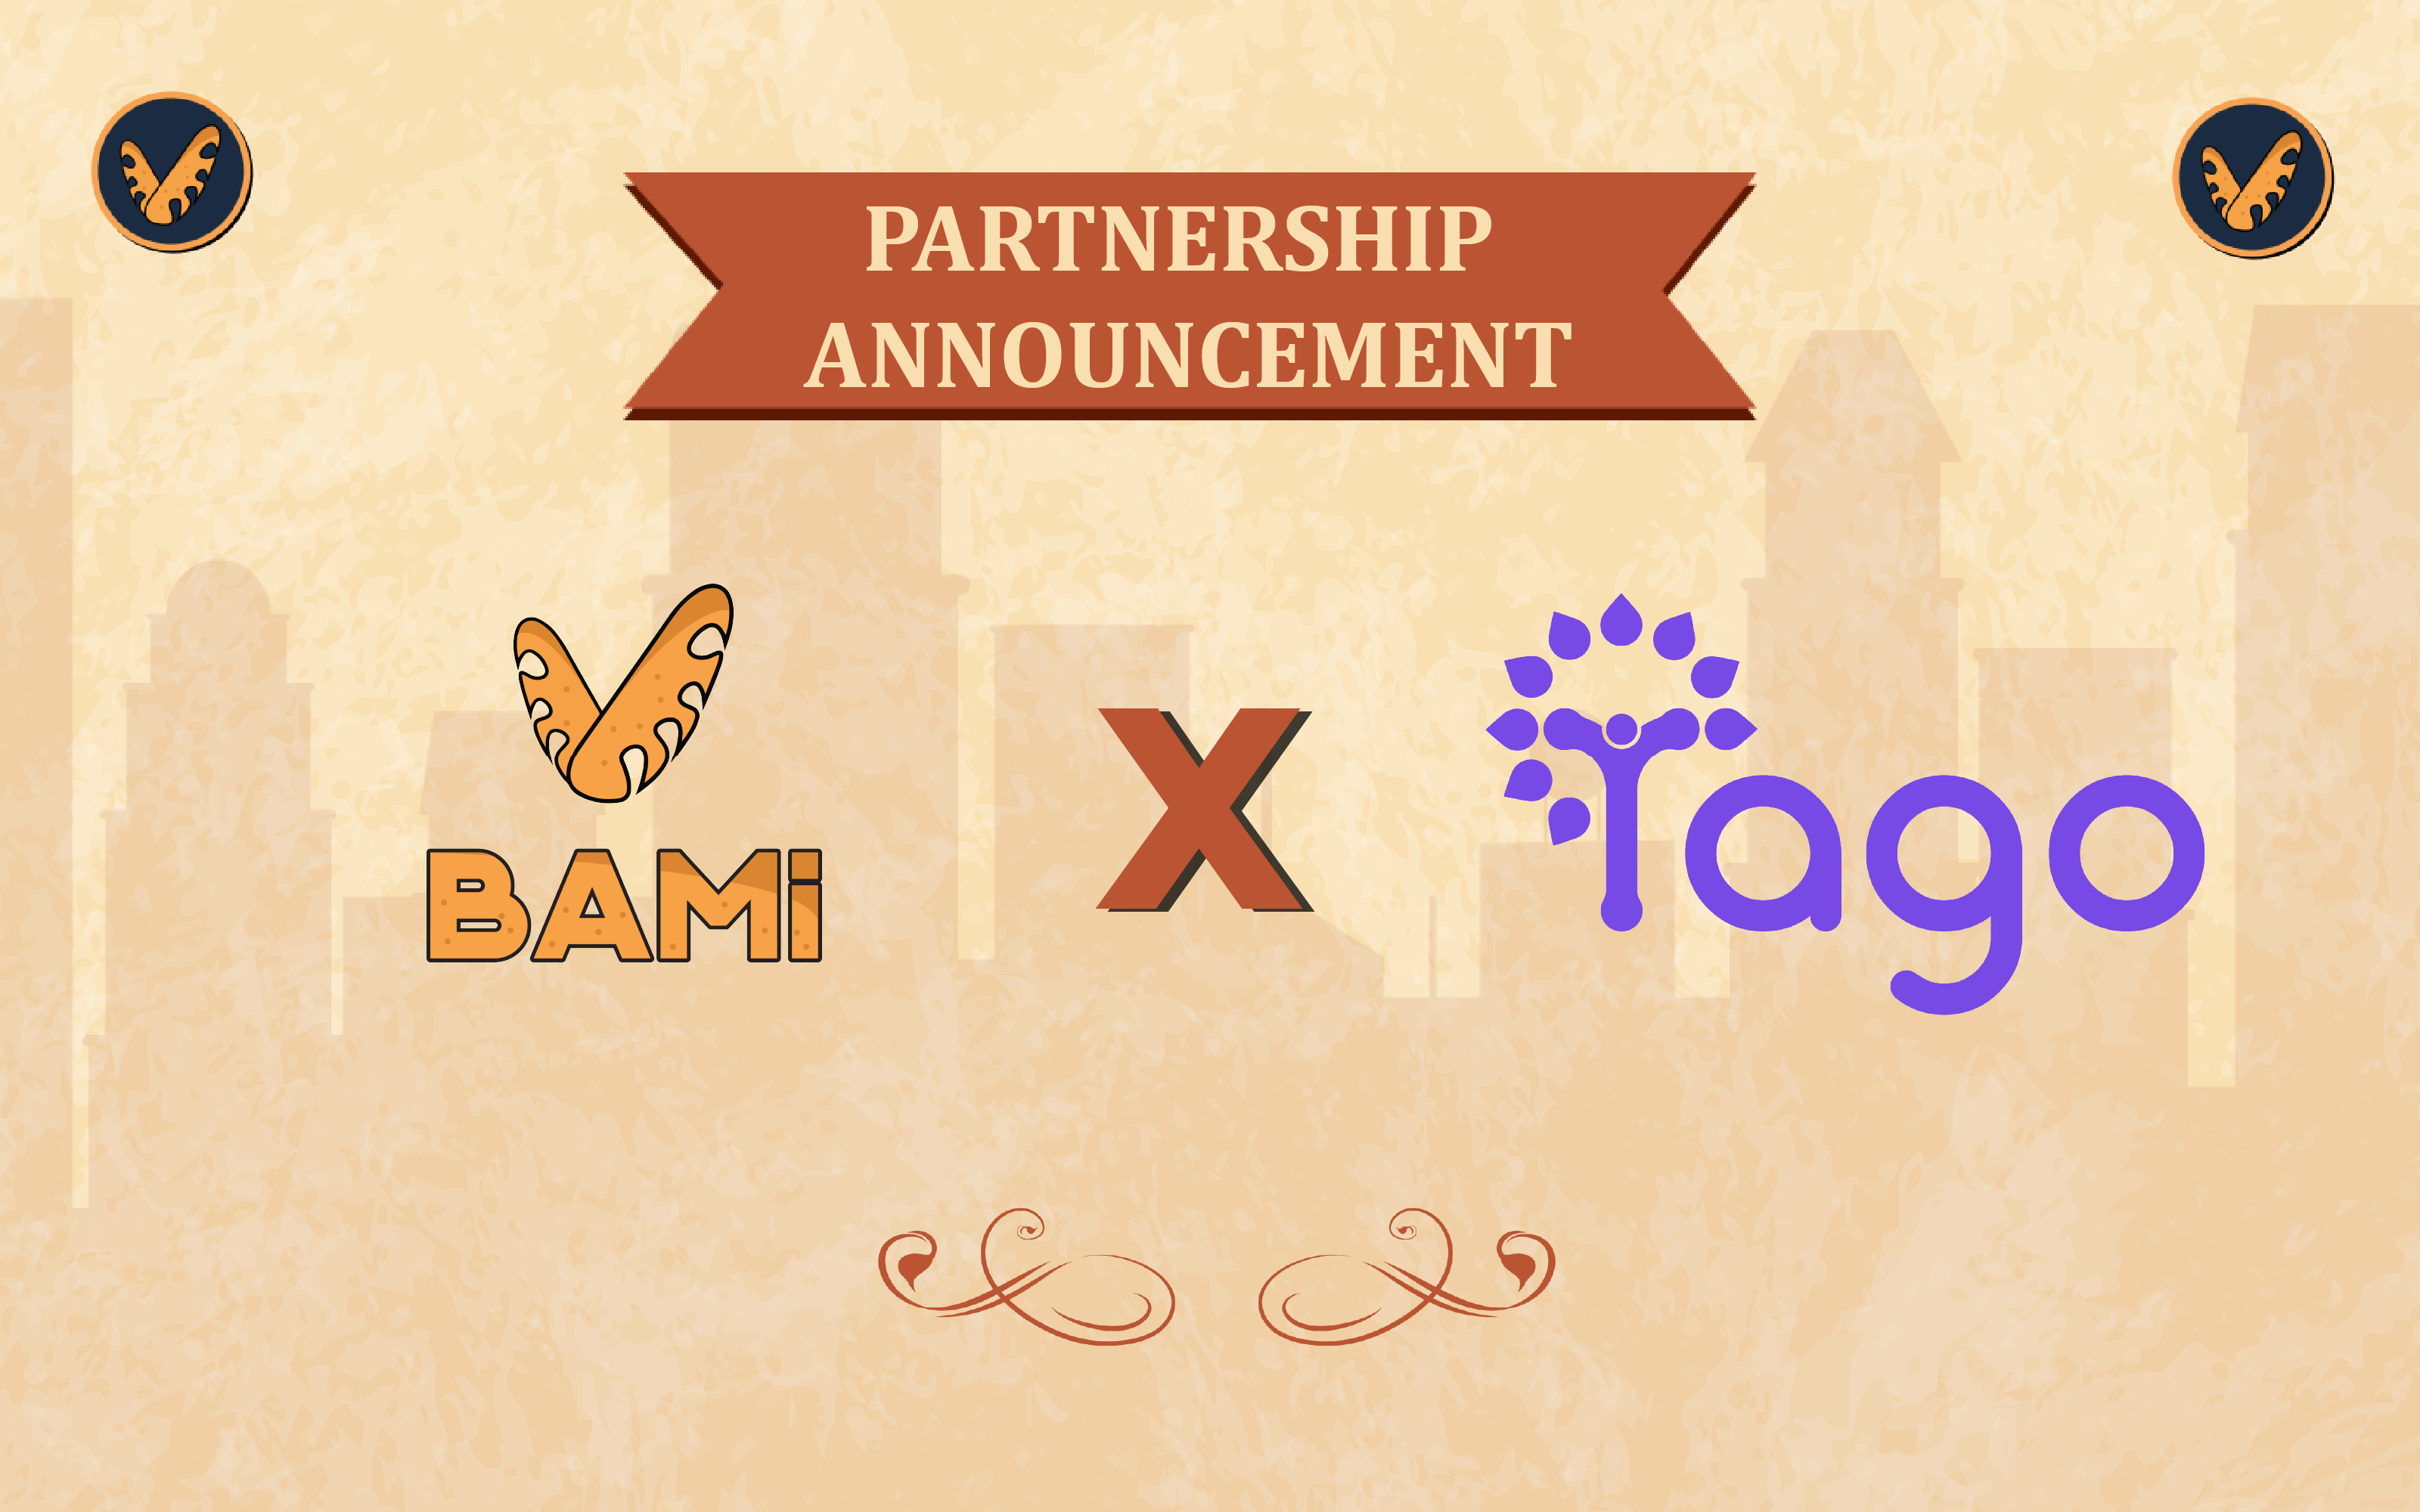 Strategic Partnership Announcement: Bami Pawn Shop and Tagoverse